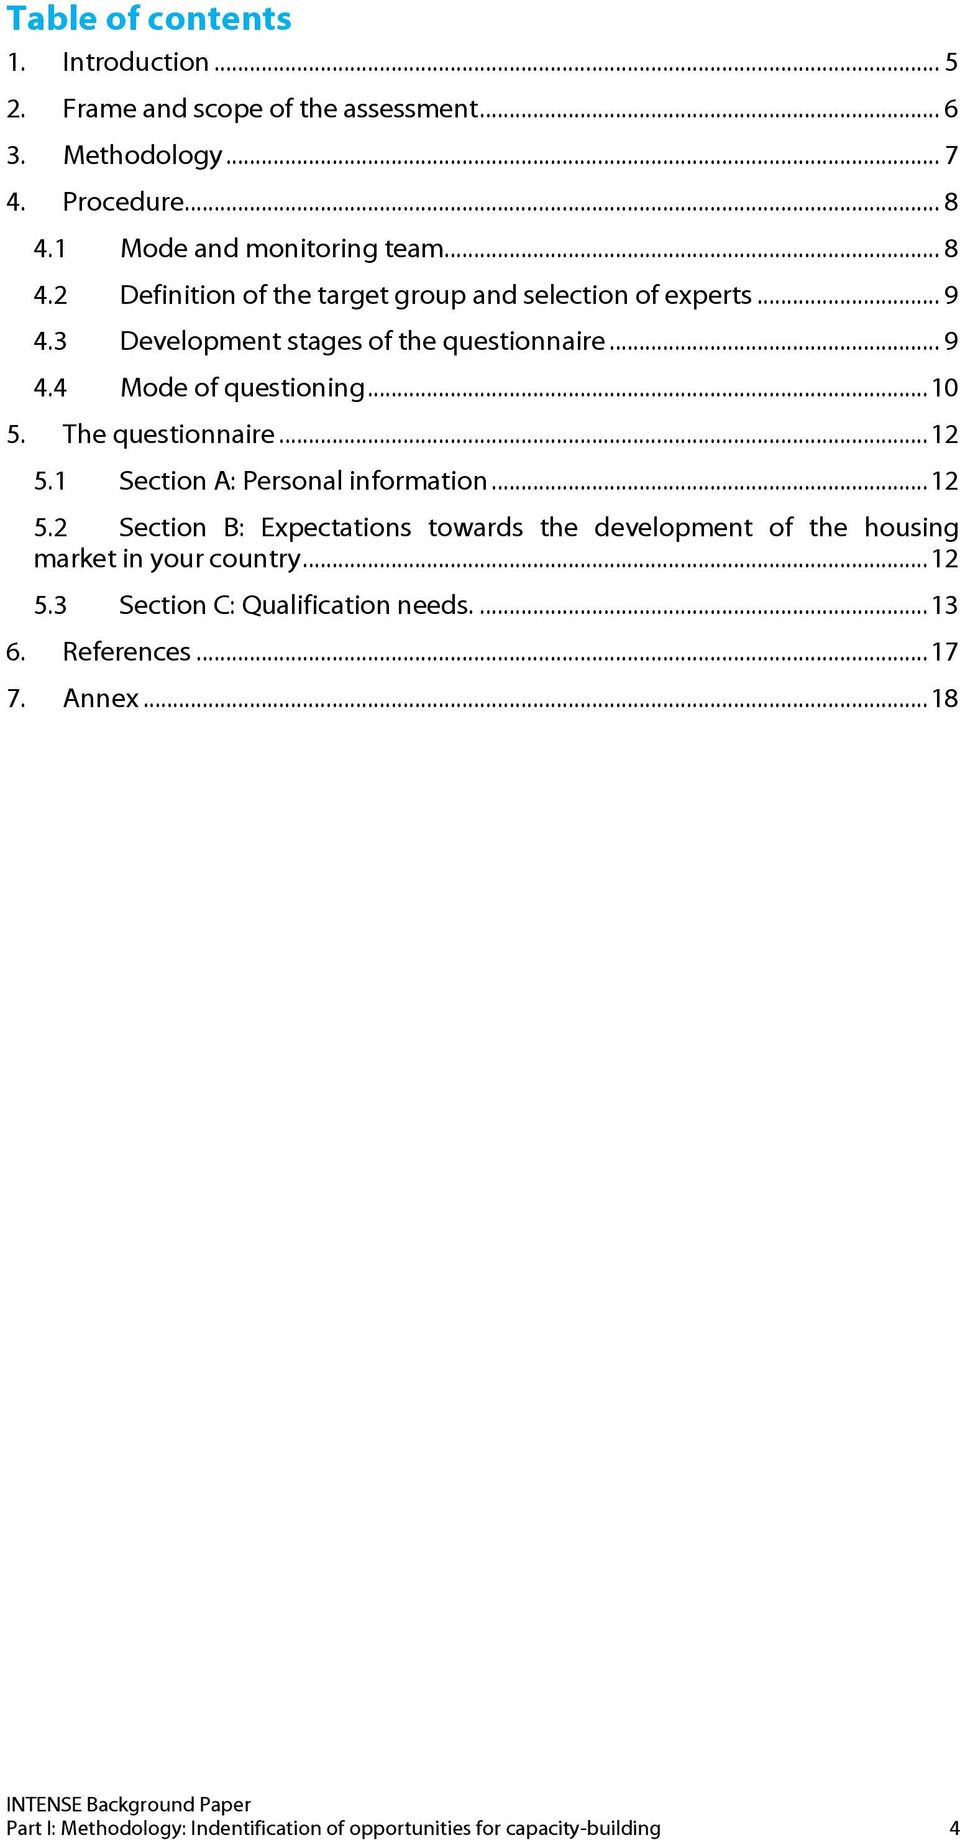 .. 10 5. The questionnaire... 12 5.1 Section A: Personal information... 12 5.2 Section B: Expectations towards the development of the housing market in your country.